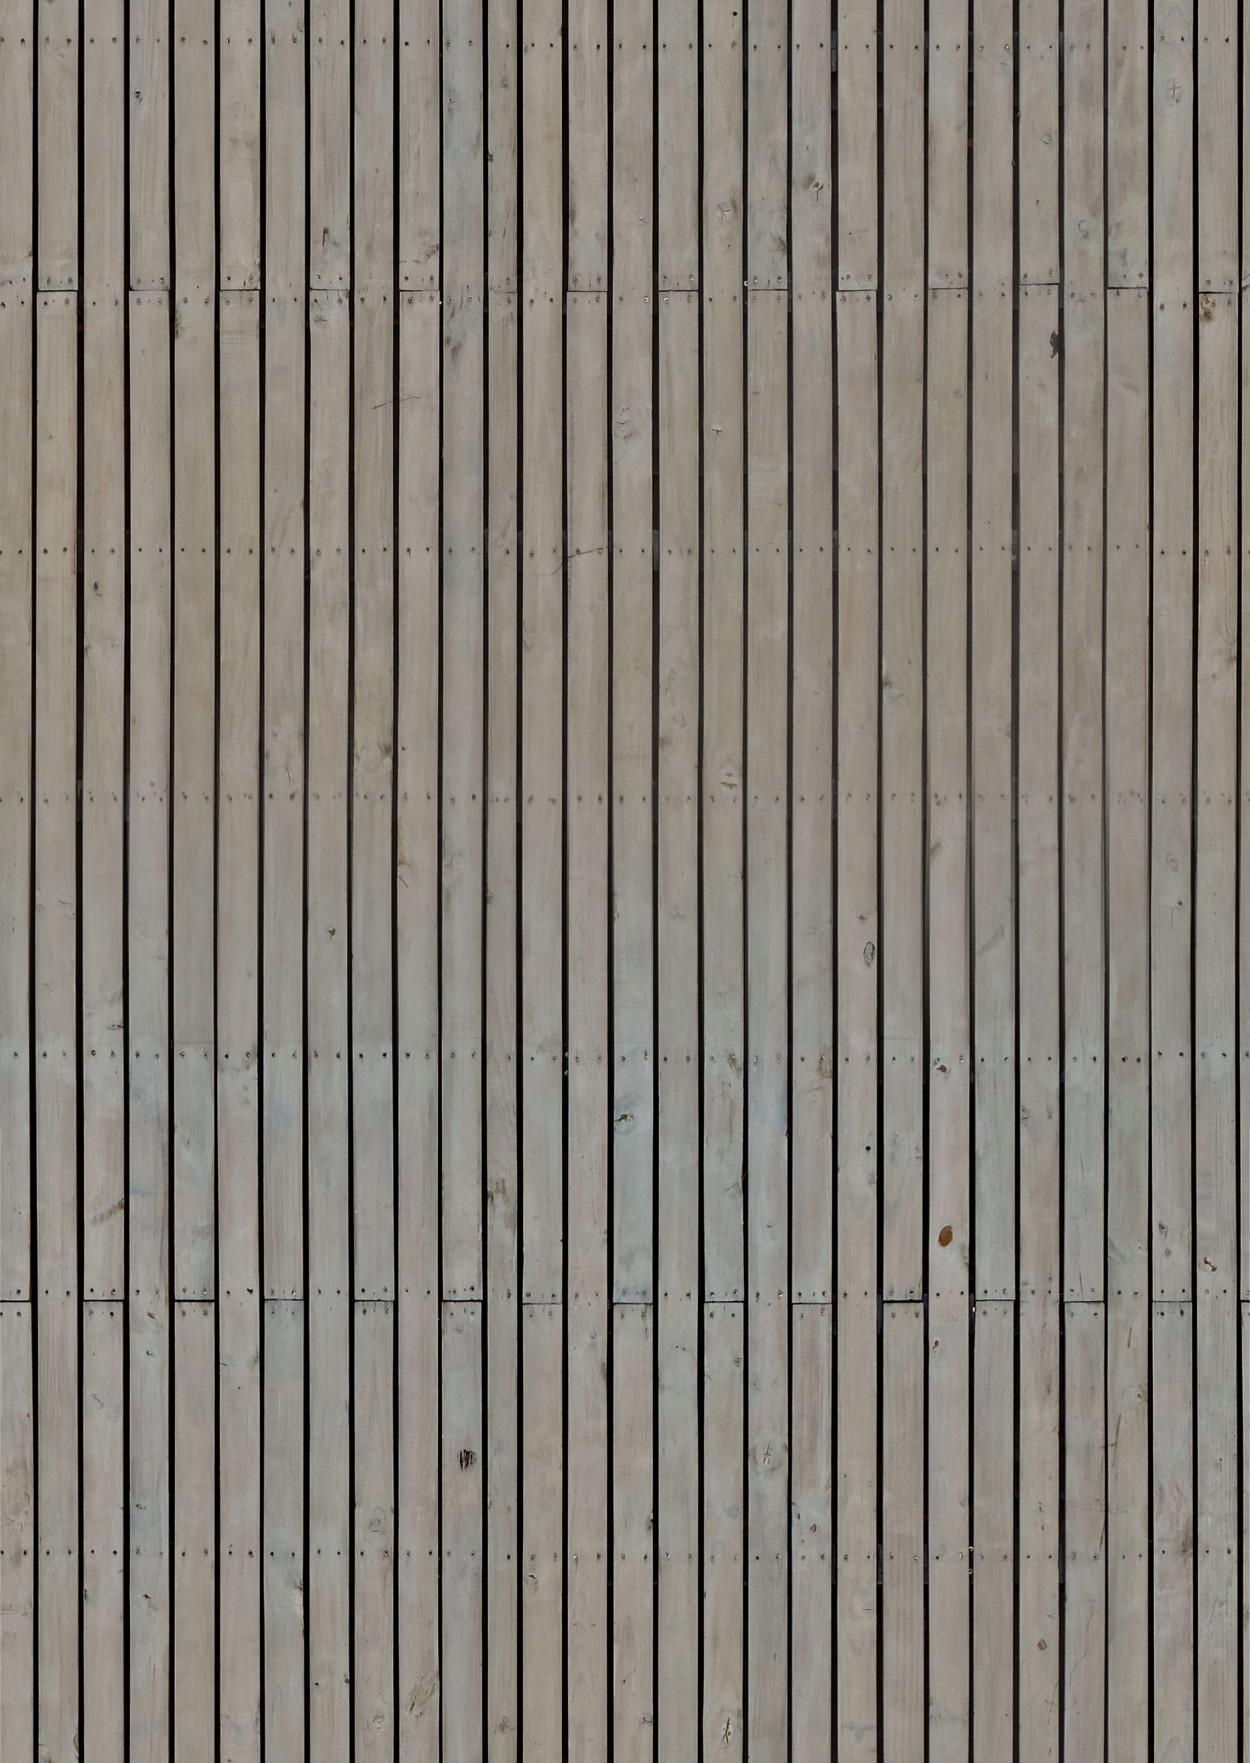 A seamless timber boards (la contador)) texture for use in architectural drawings and 3D models